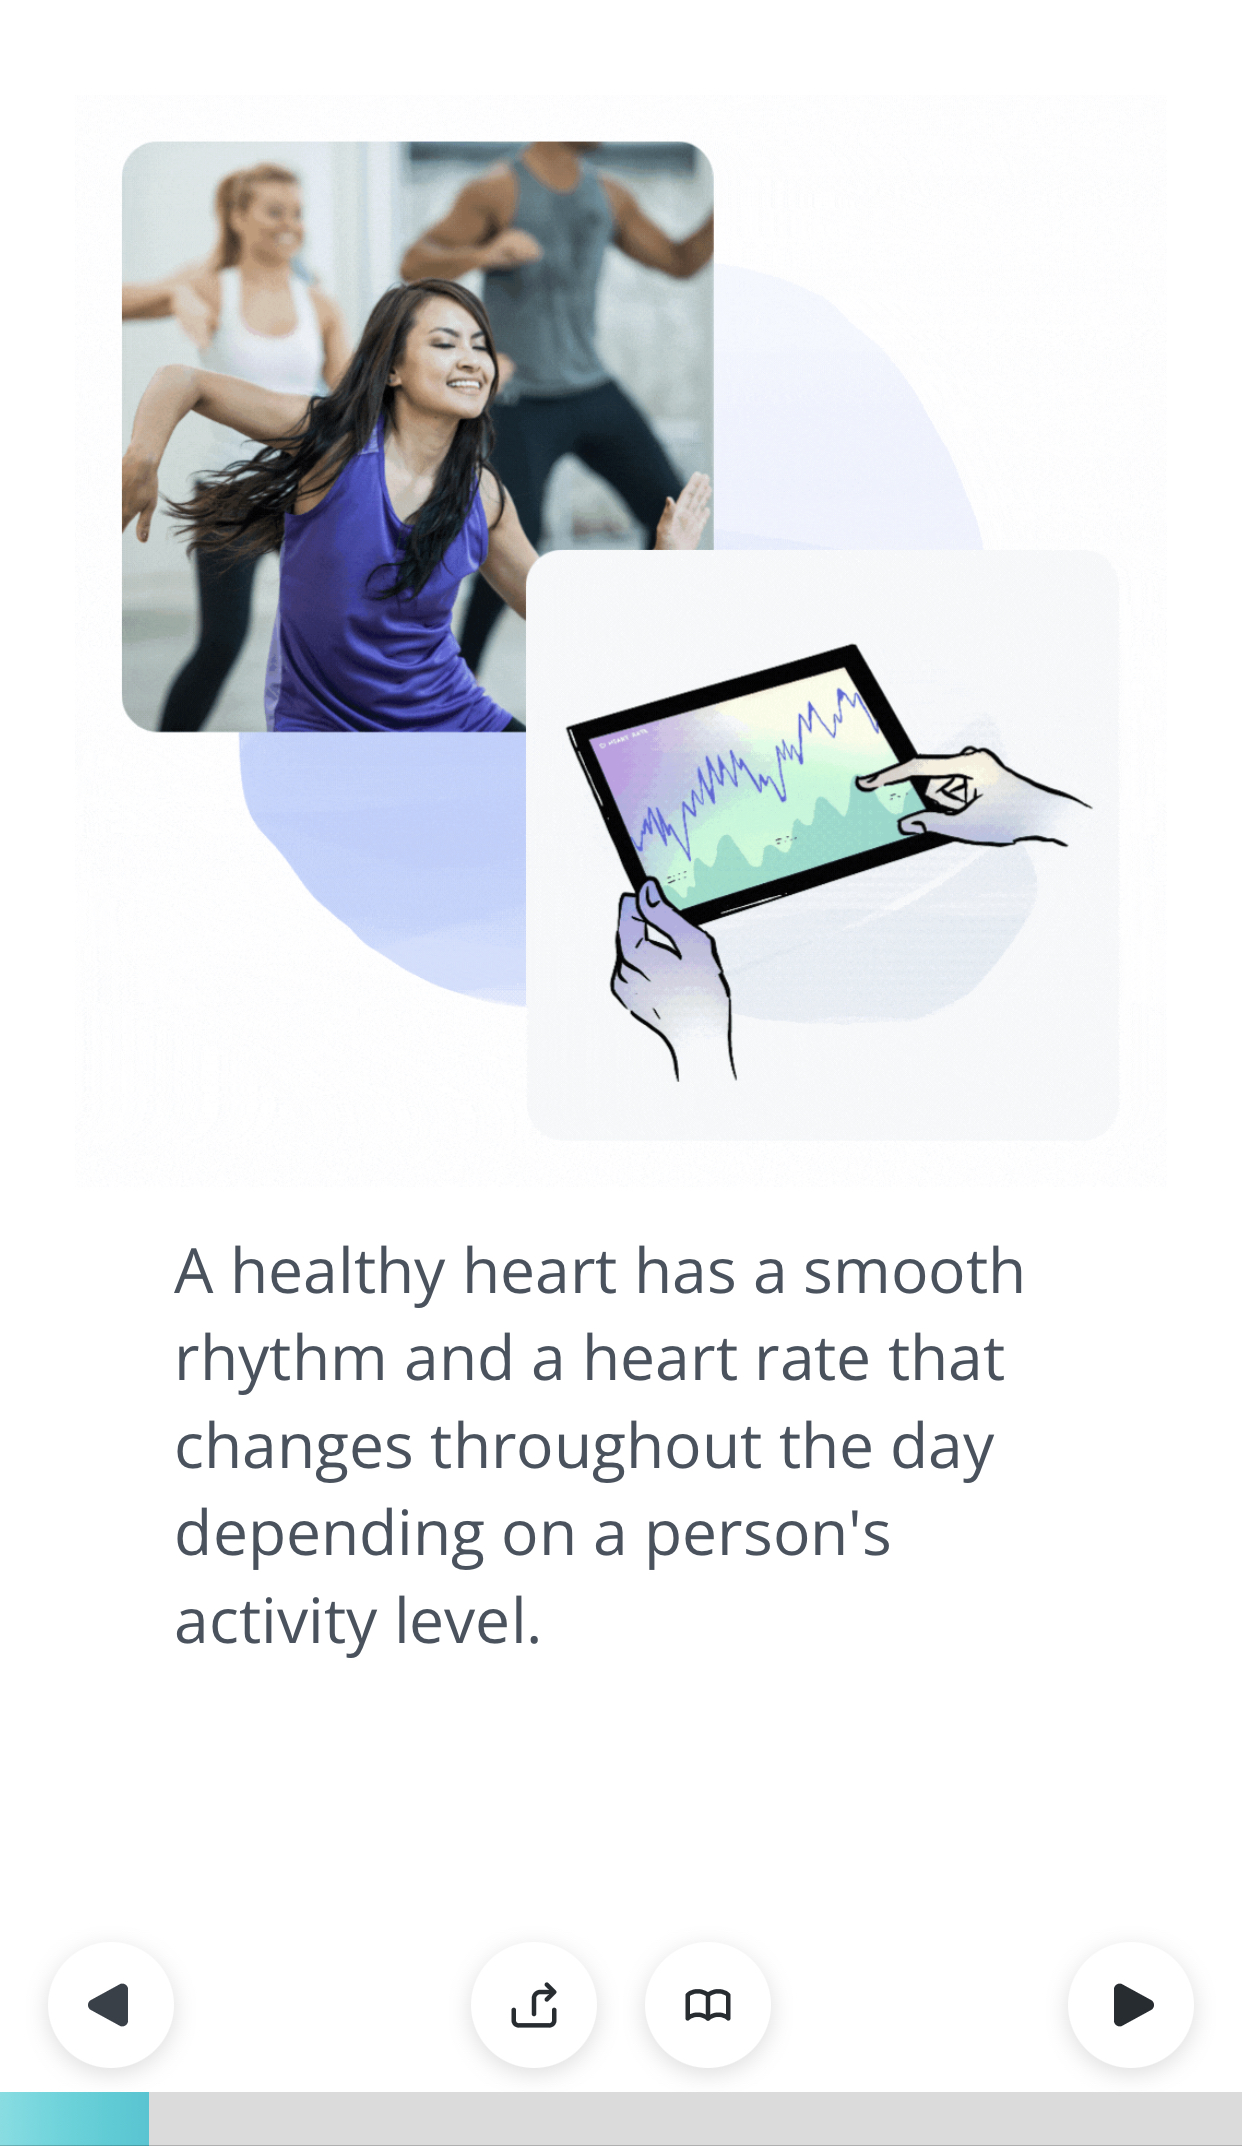 A healthy heart has a smooth rhythm and a heart rate that changes throughout the day depending on a person's activity level